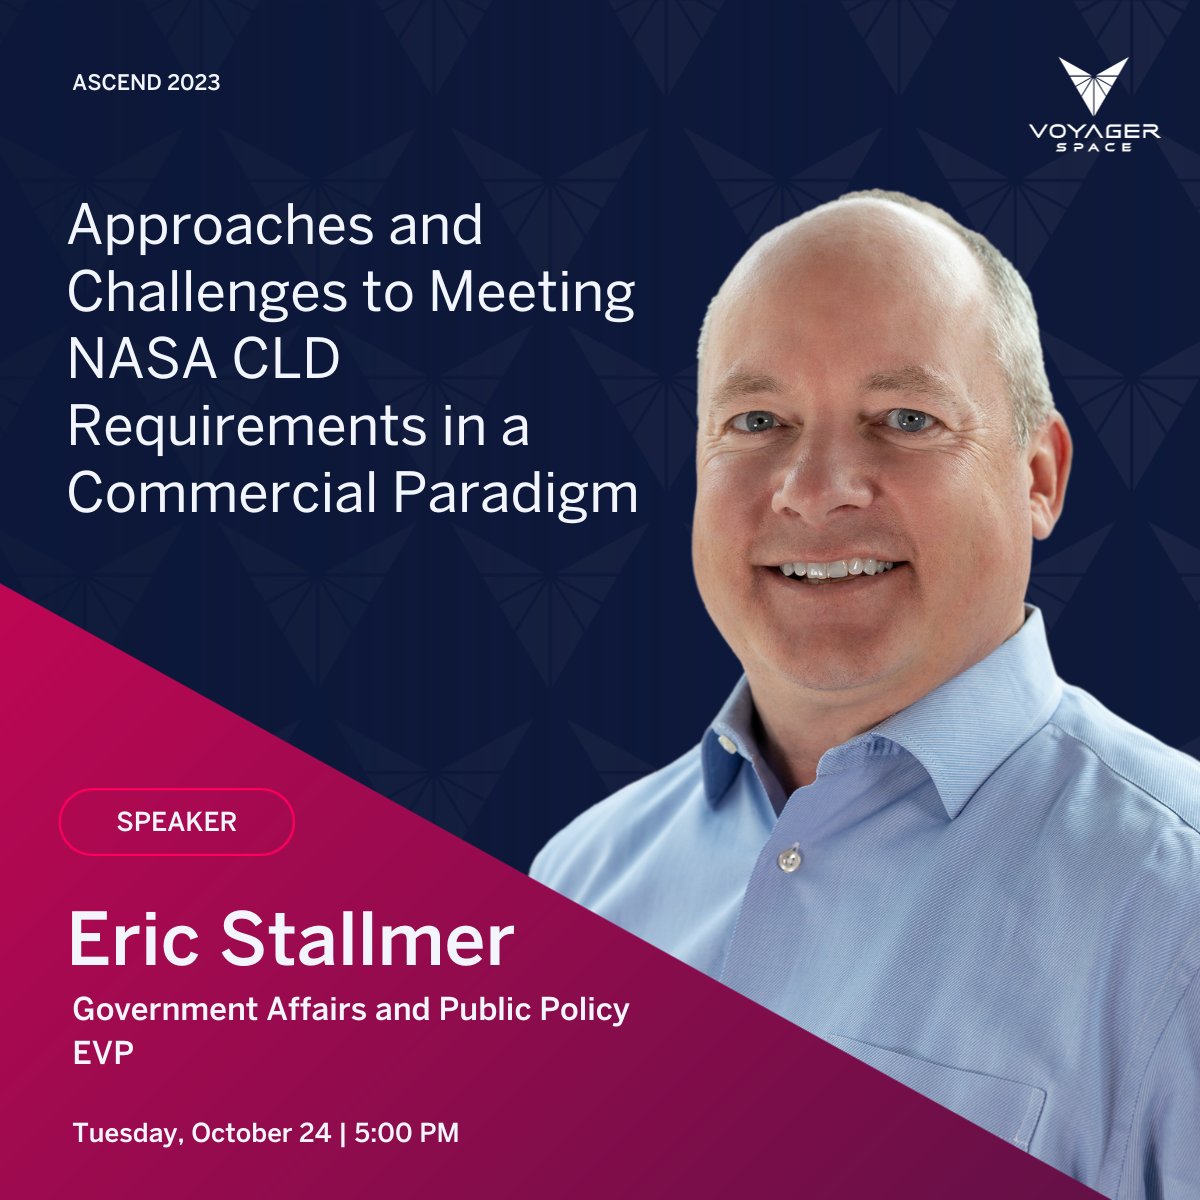 Our EVP of Government Affairs and Public Policy, Eric Stallmer will be speaking at #ASCEND2023! Dive deep into the intricacies of qualifying for NASA service contracts in the realm of low-Earth orbit destinations tomorrow @ 5PM!